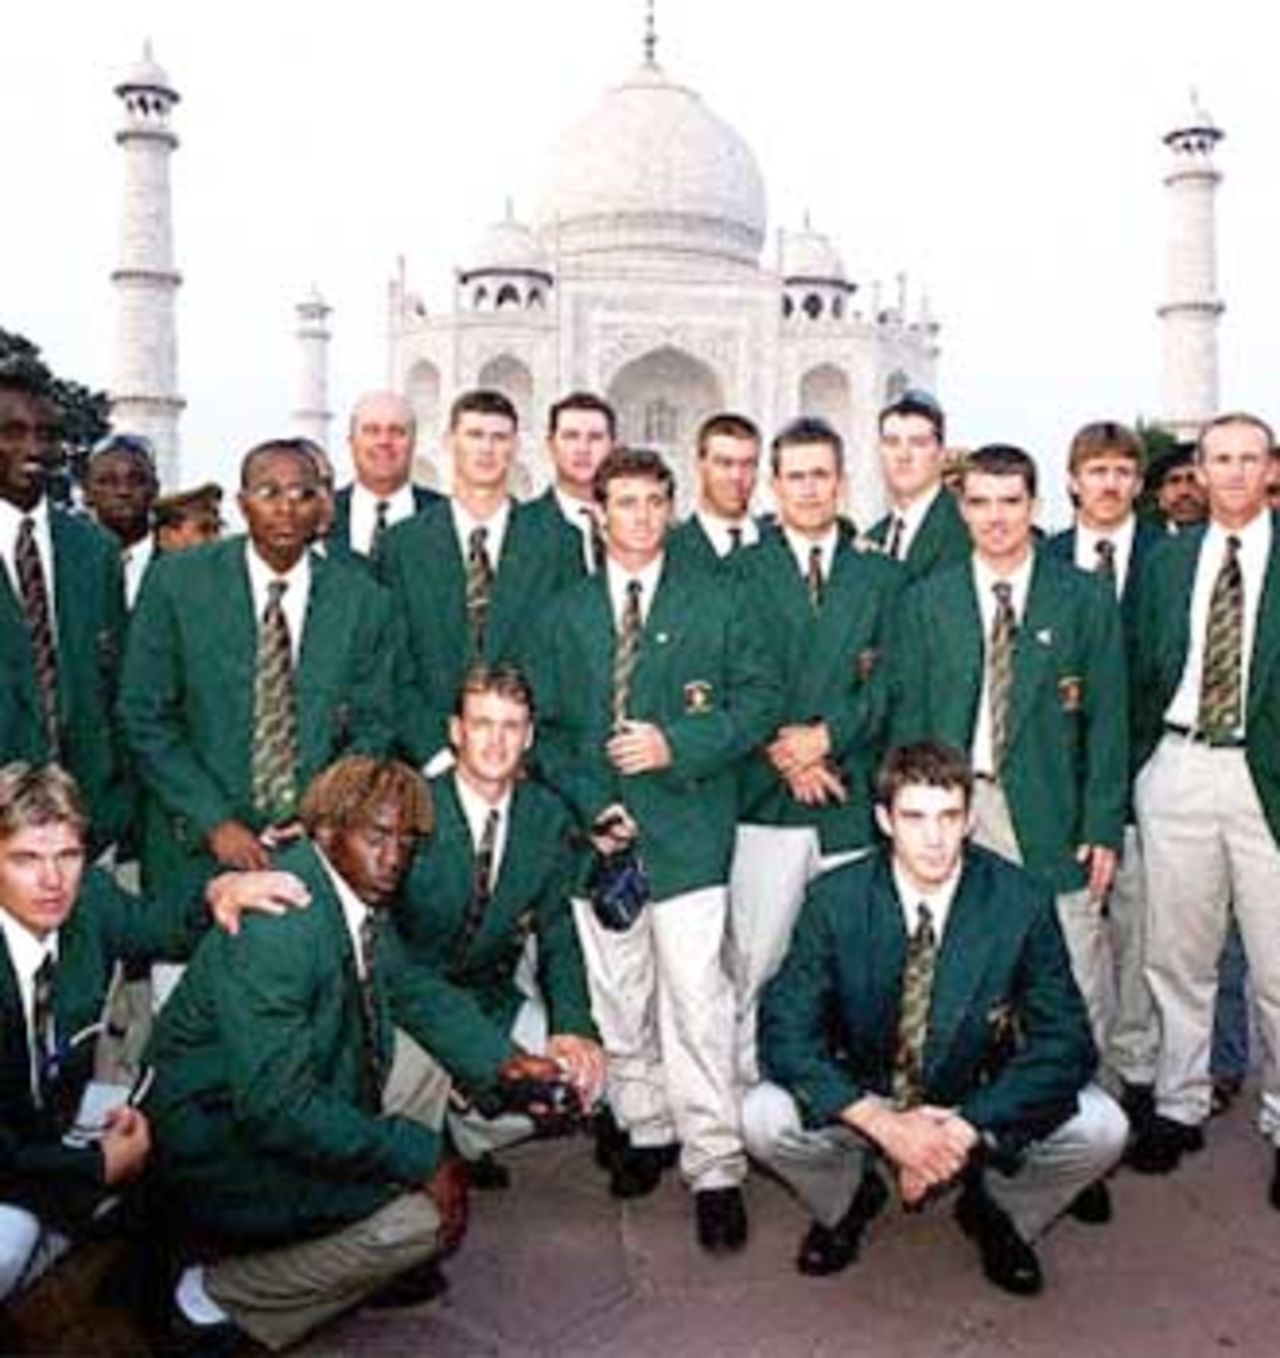 Zimbabwe cricket team members pose in front of the Taj Mahal in Agra, 24 November 2000. Zimbabwe will play their second test match against India at Nagpur on November 25.